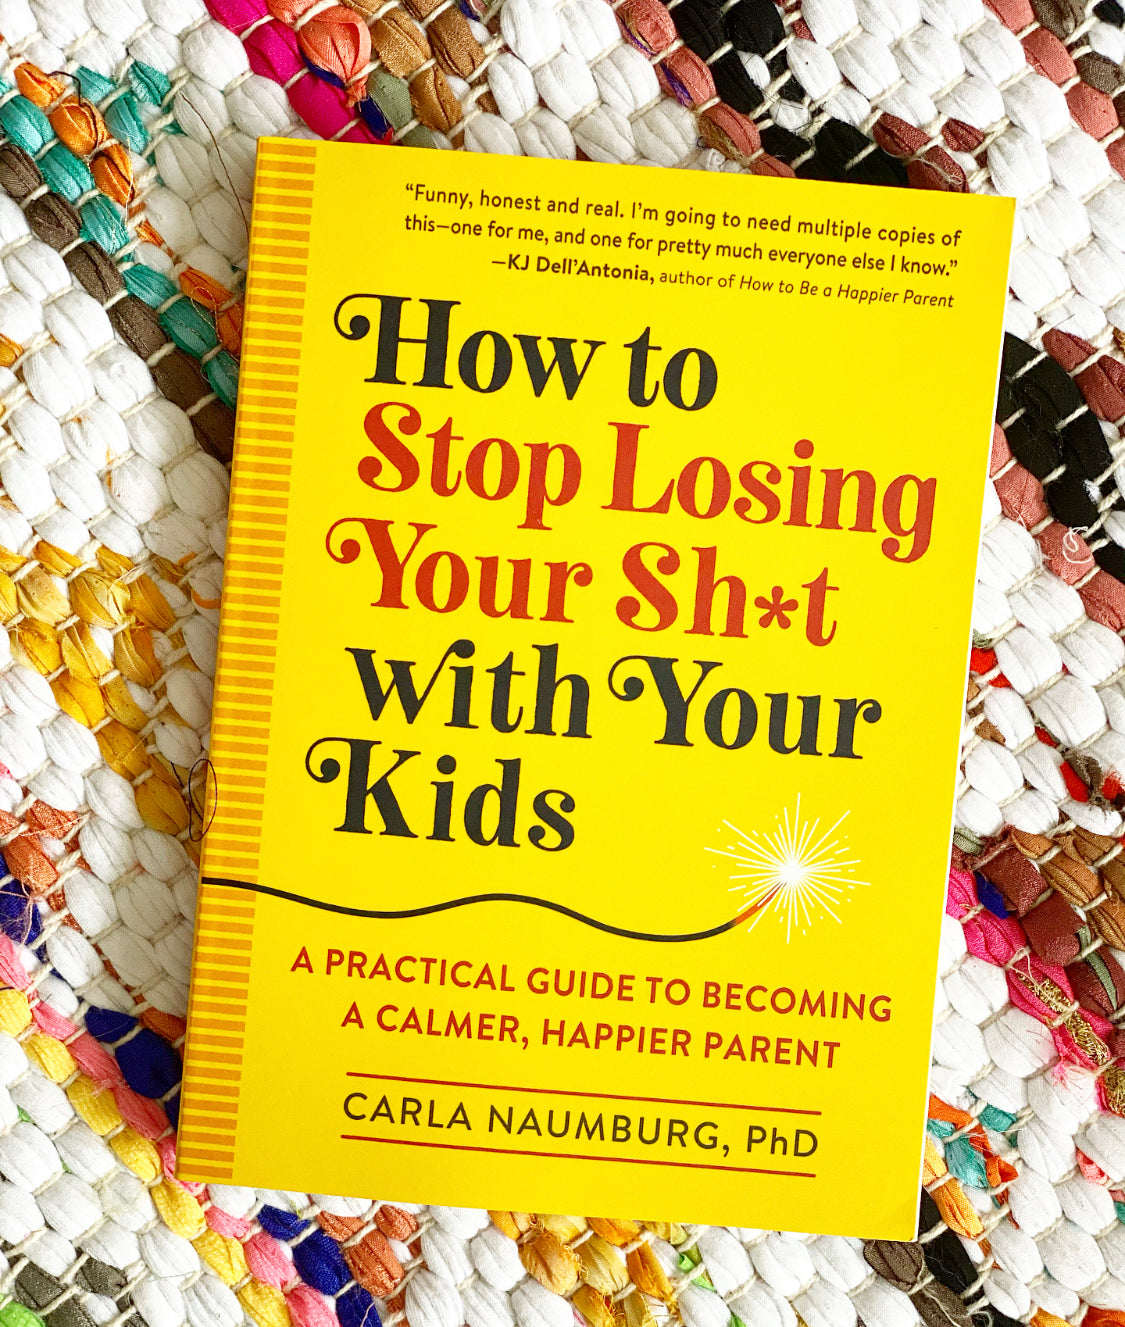 How to Stop Losing Your Sh*t with Your Kids: A Practical Guide to